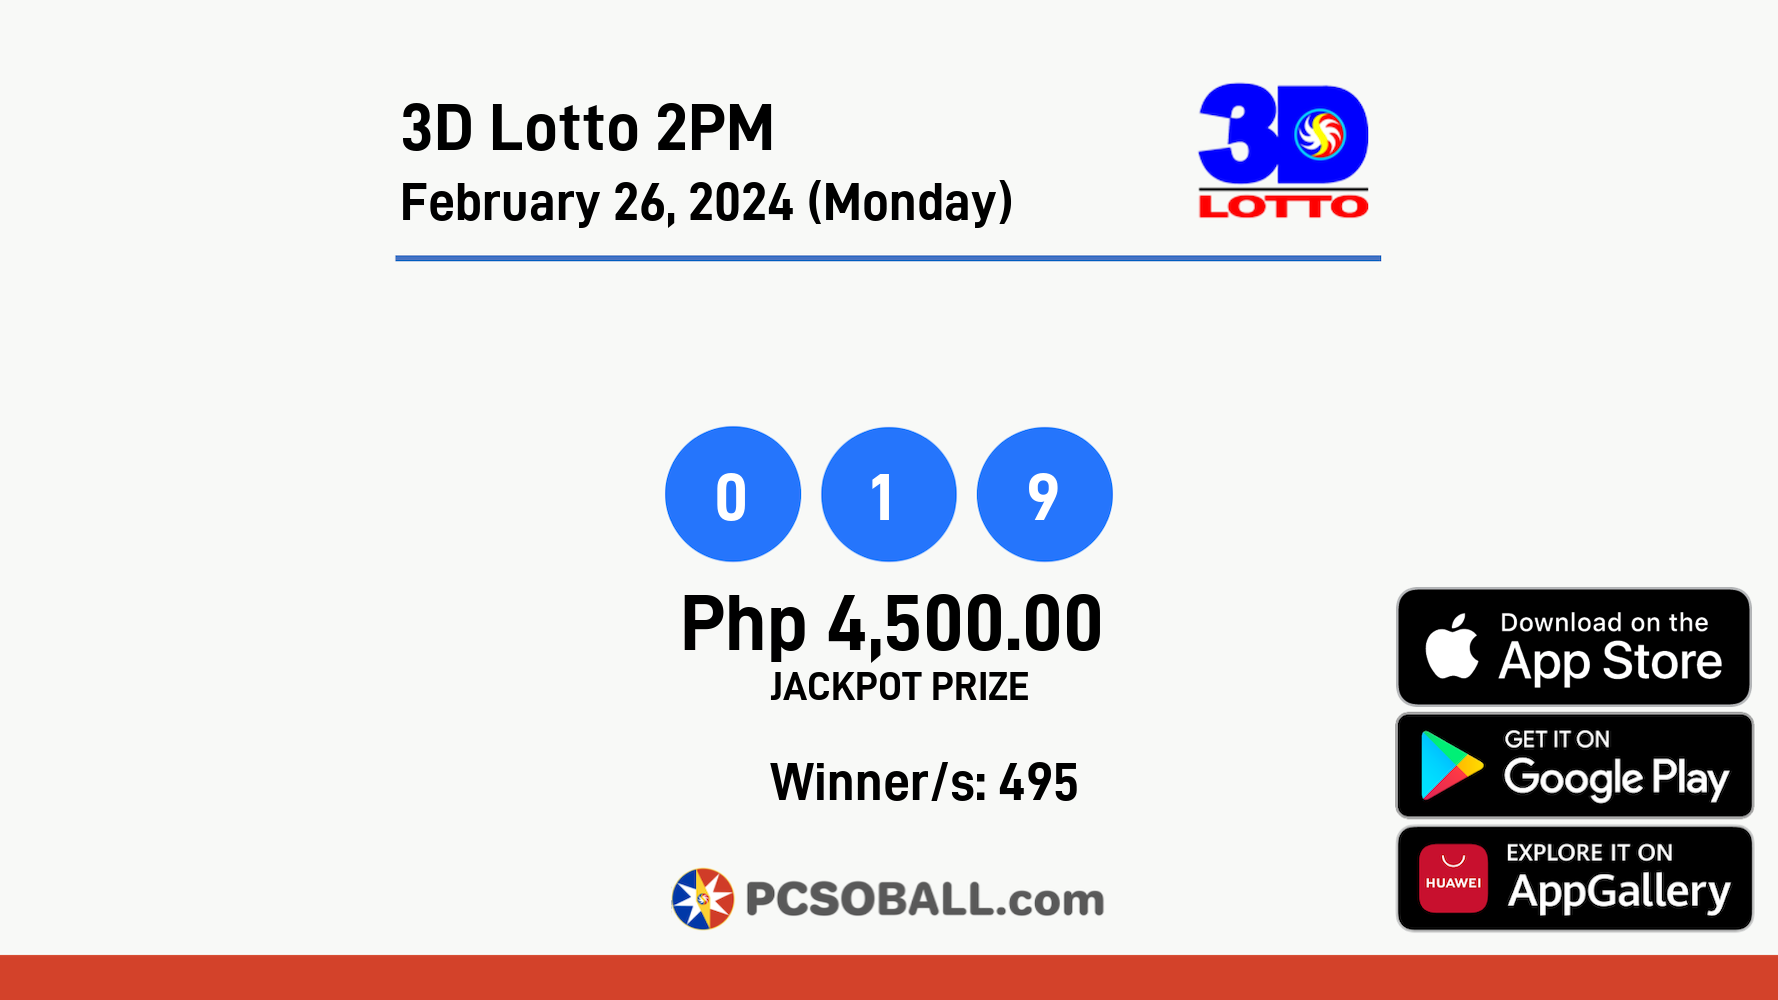 3D Lotto 2PM February 26, 2024 (Monday) Result